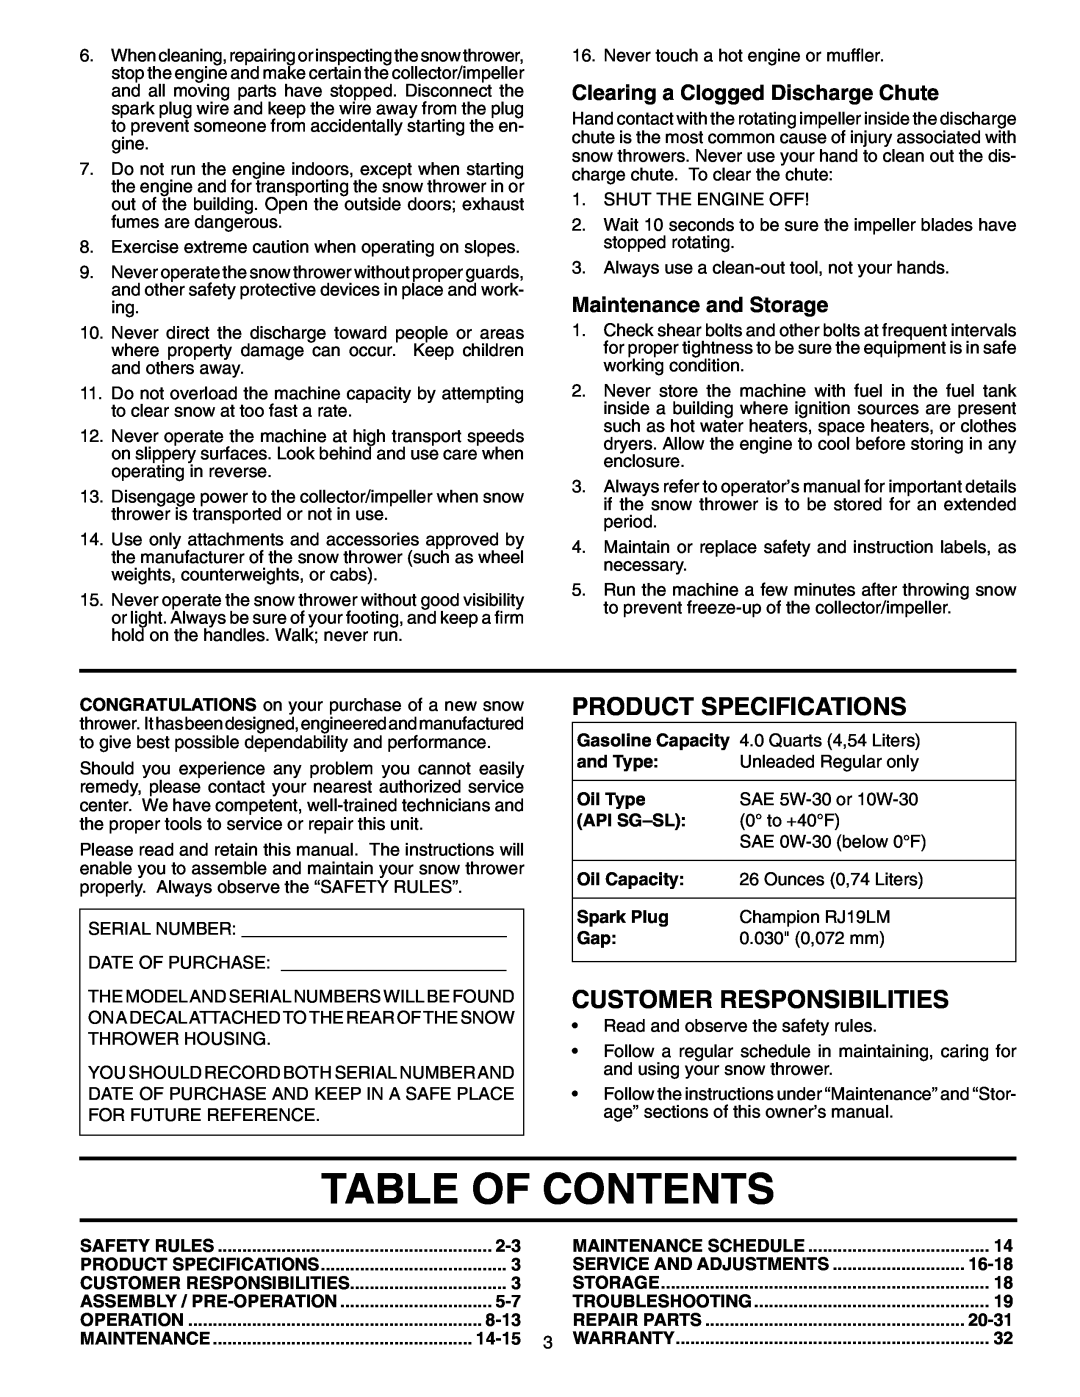 Poulan 408373 Table Of Contents, Product Specifications, Customer Responsibilities, Clearing a Clogged Discharge Chute 